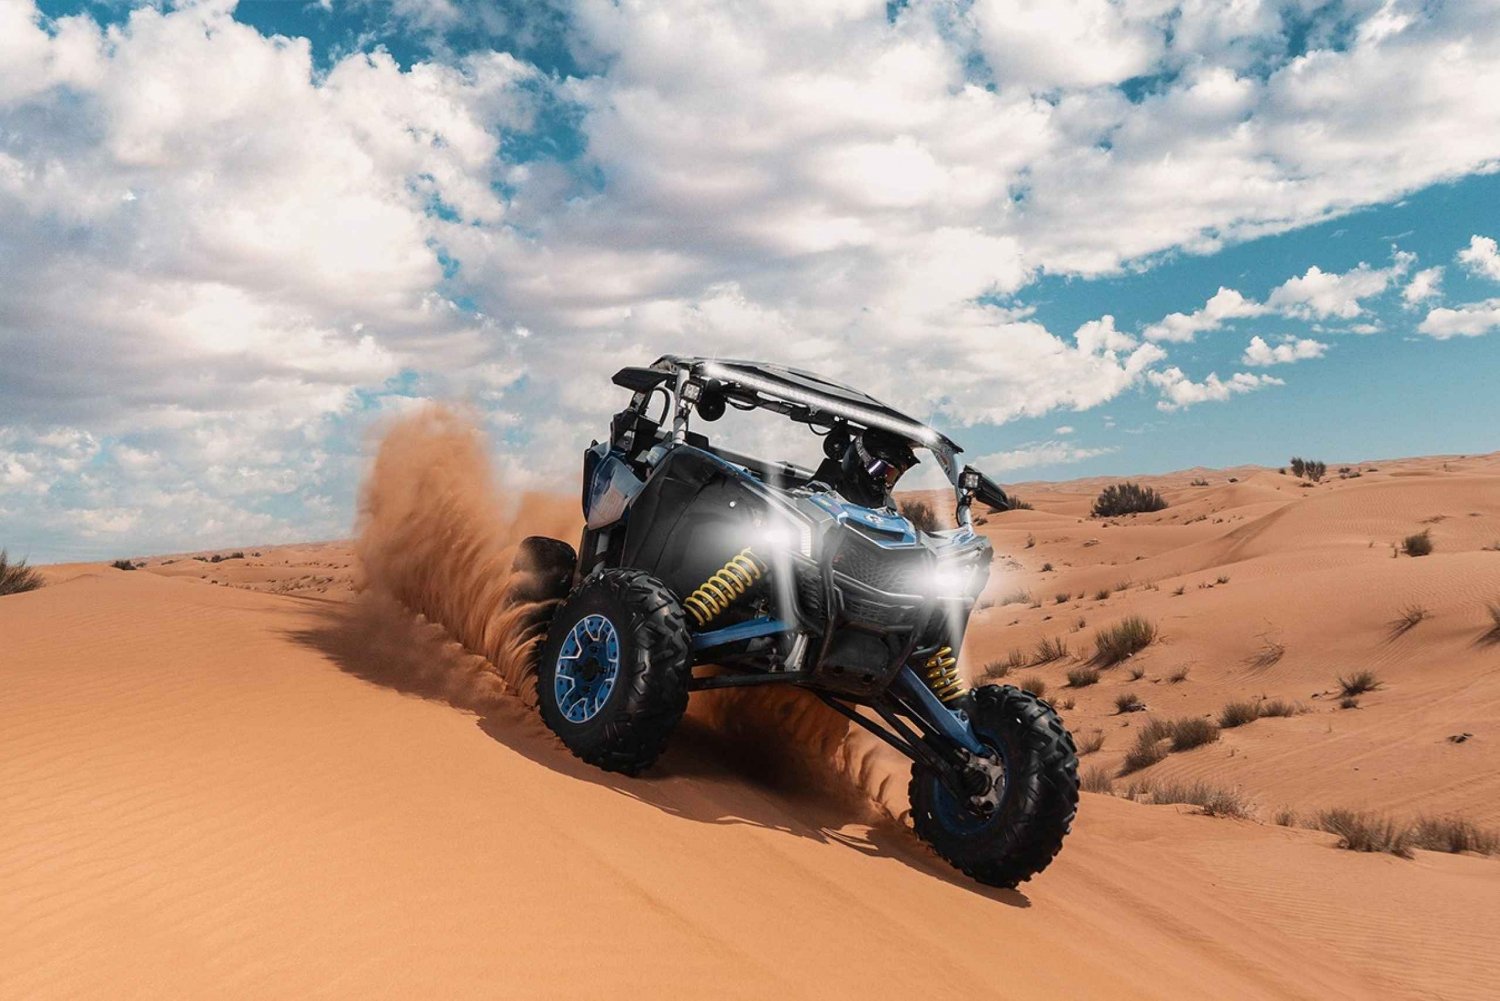 Dubai: Self-Drive Guided Desert Adventure by 4WD Dune Buggy